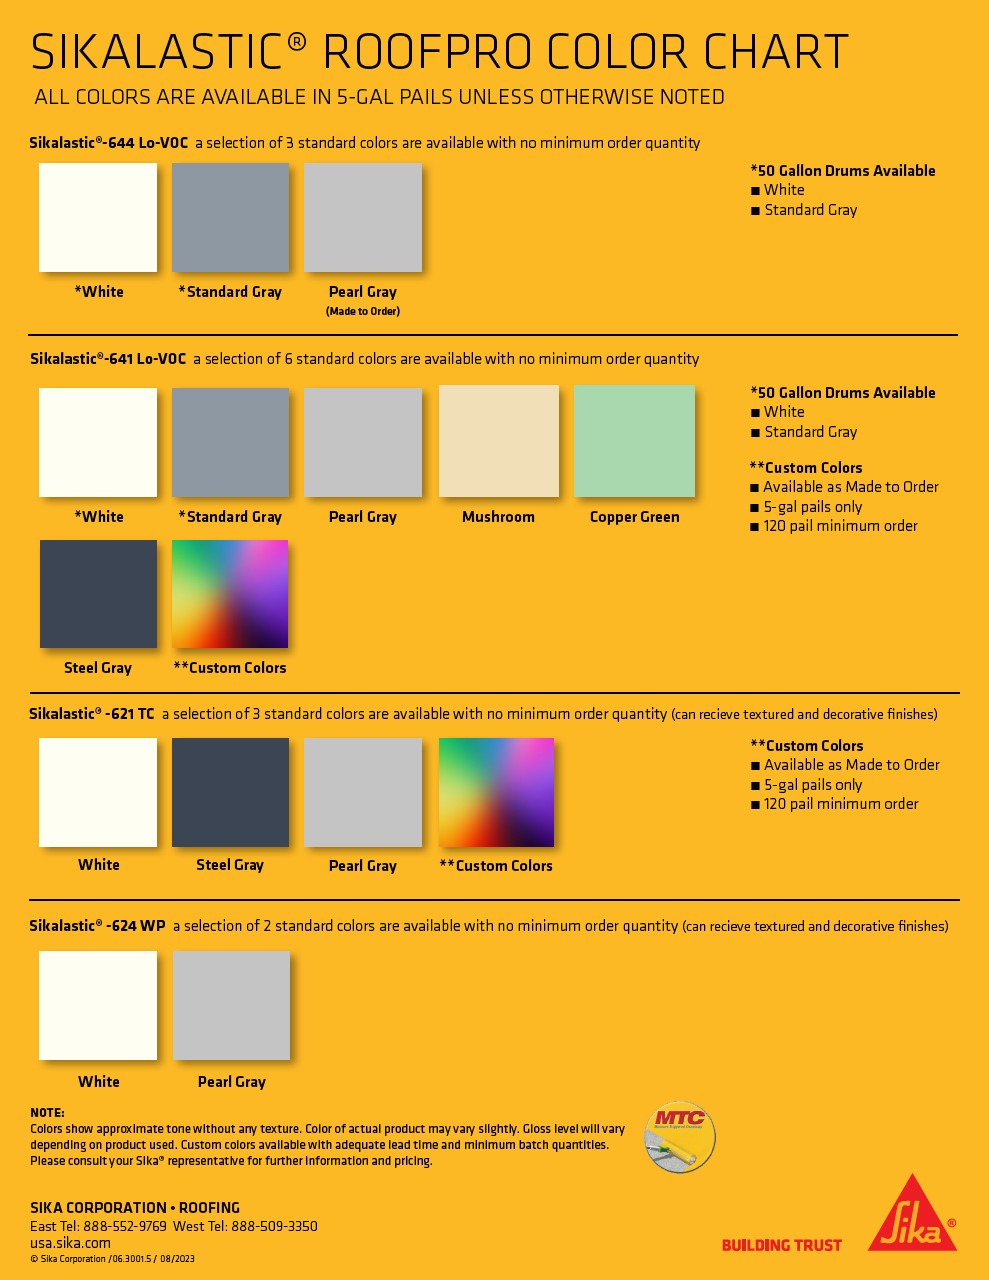 RoofPro Color Chart